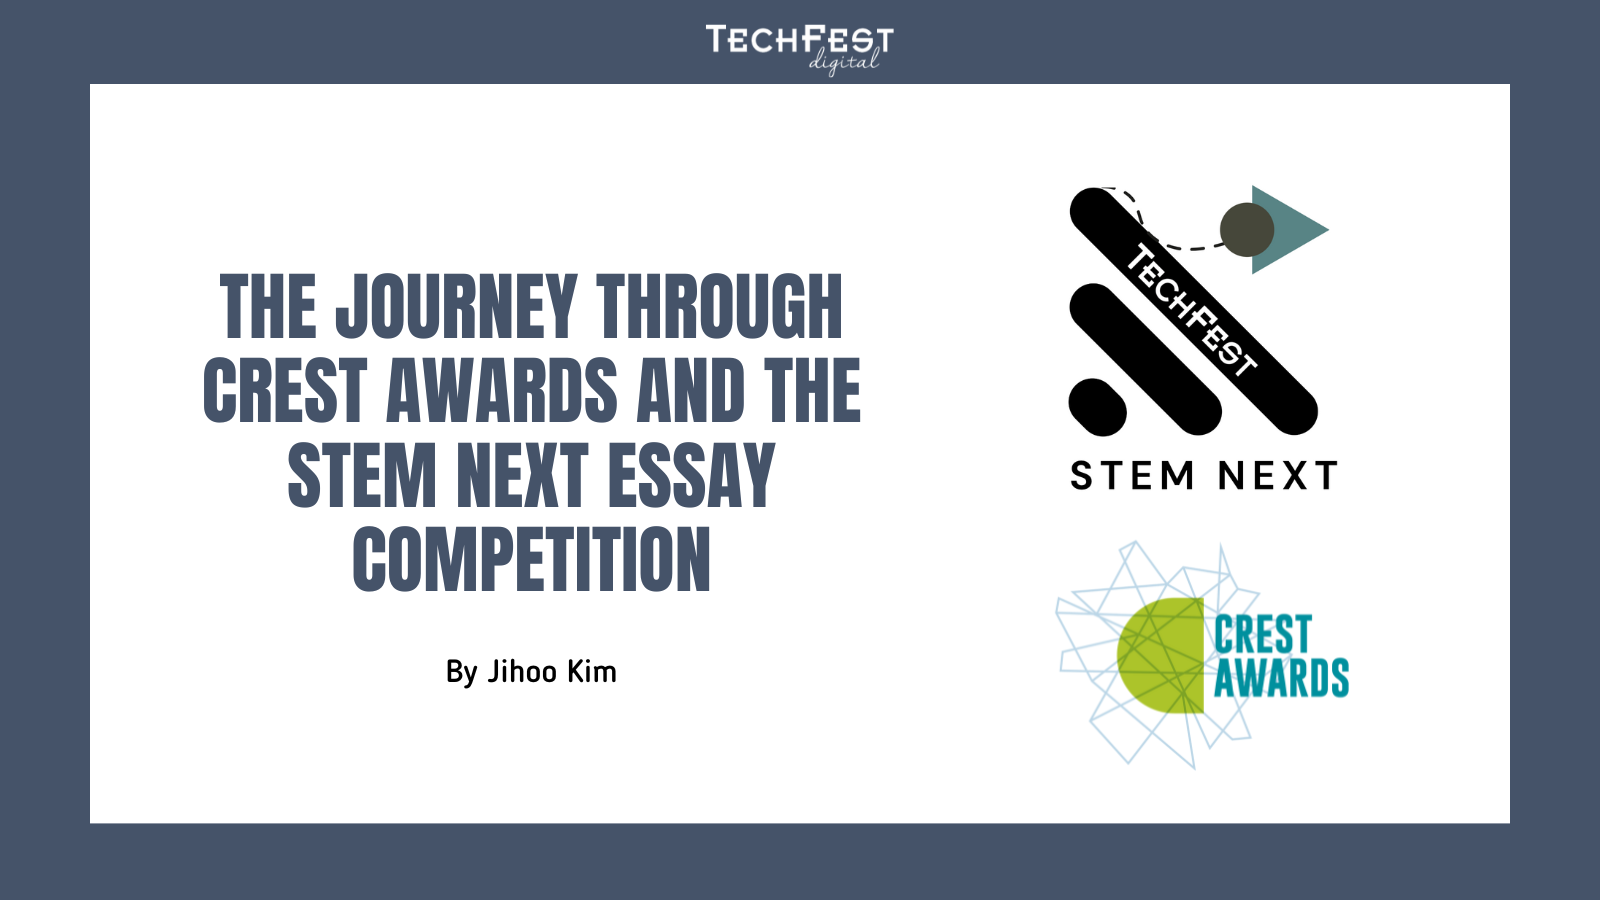 The Journey through CREST Awards and the STEM Next Essay Competition